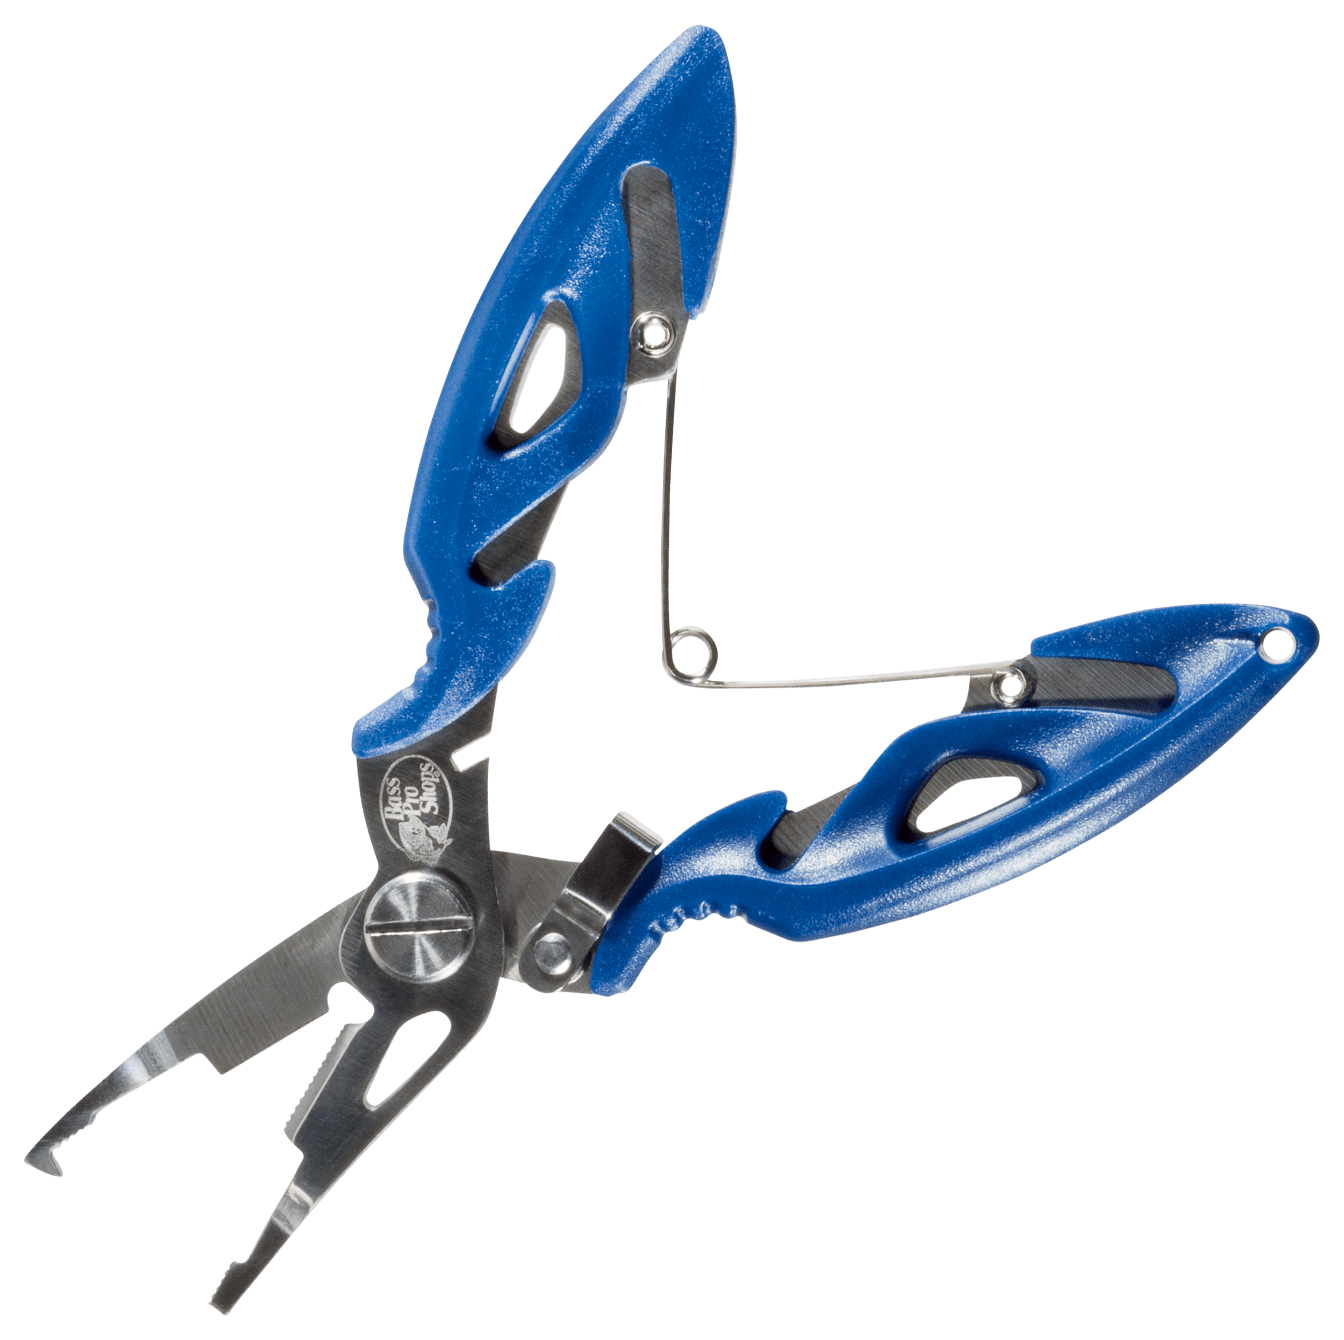 Bass Pro Shops Braid Cutter/Split Ring Pliers-Blue - fishing gifts for dad